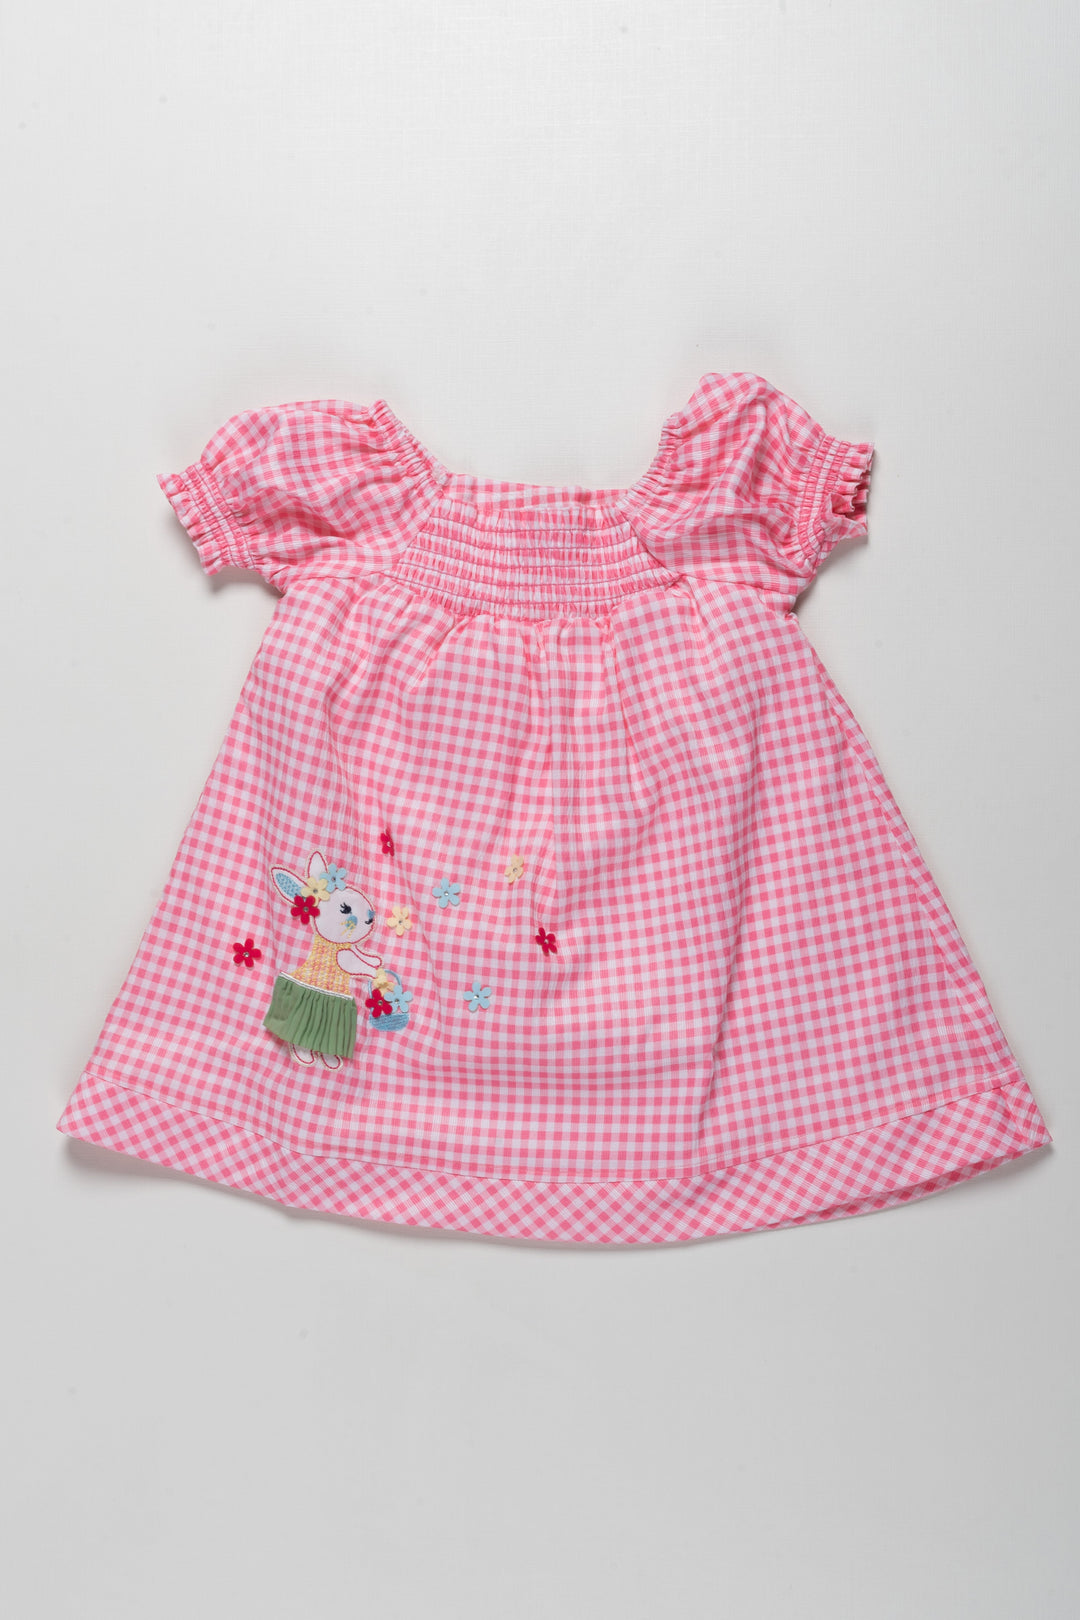 The Nesavu Girls Cotton Frock Delightful Girls Pink Gingham Cotton Frock with Bunny and Flower Embroidery Nesavu 14 (6M) / Pink / Cotton GFC1327B-14 Delightful Girls Pink Gingham Cotton Frock with Bunny Embroidery | The Nesavu